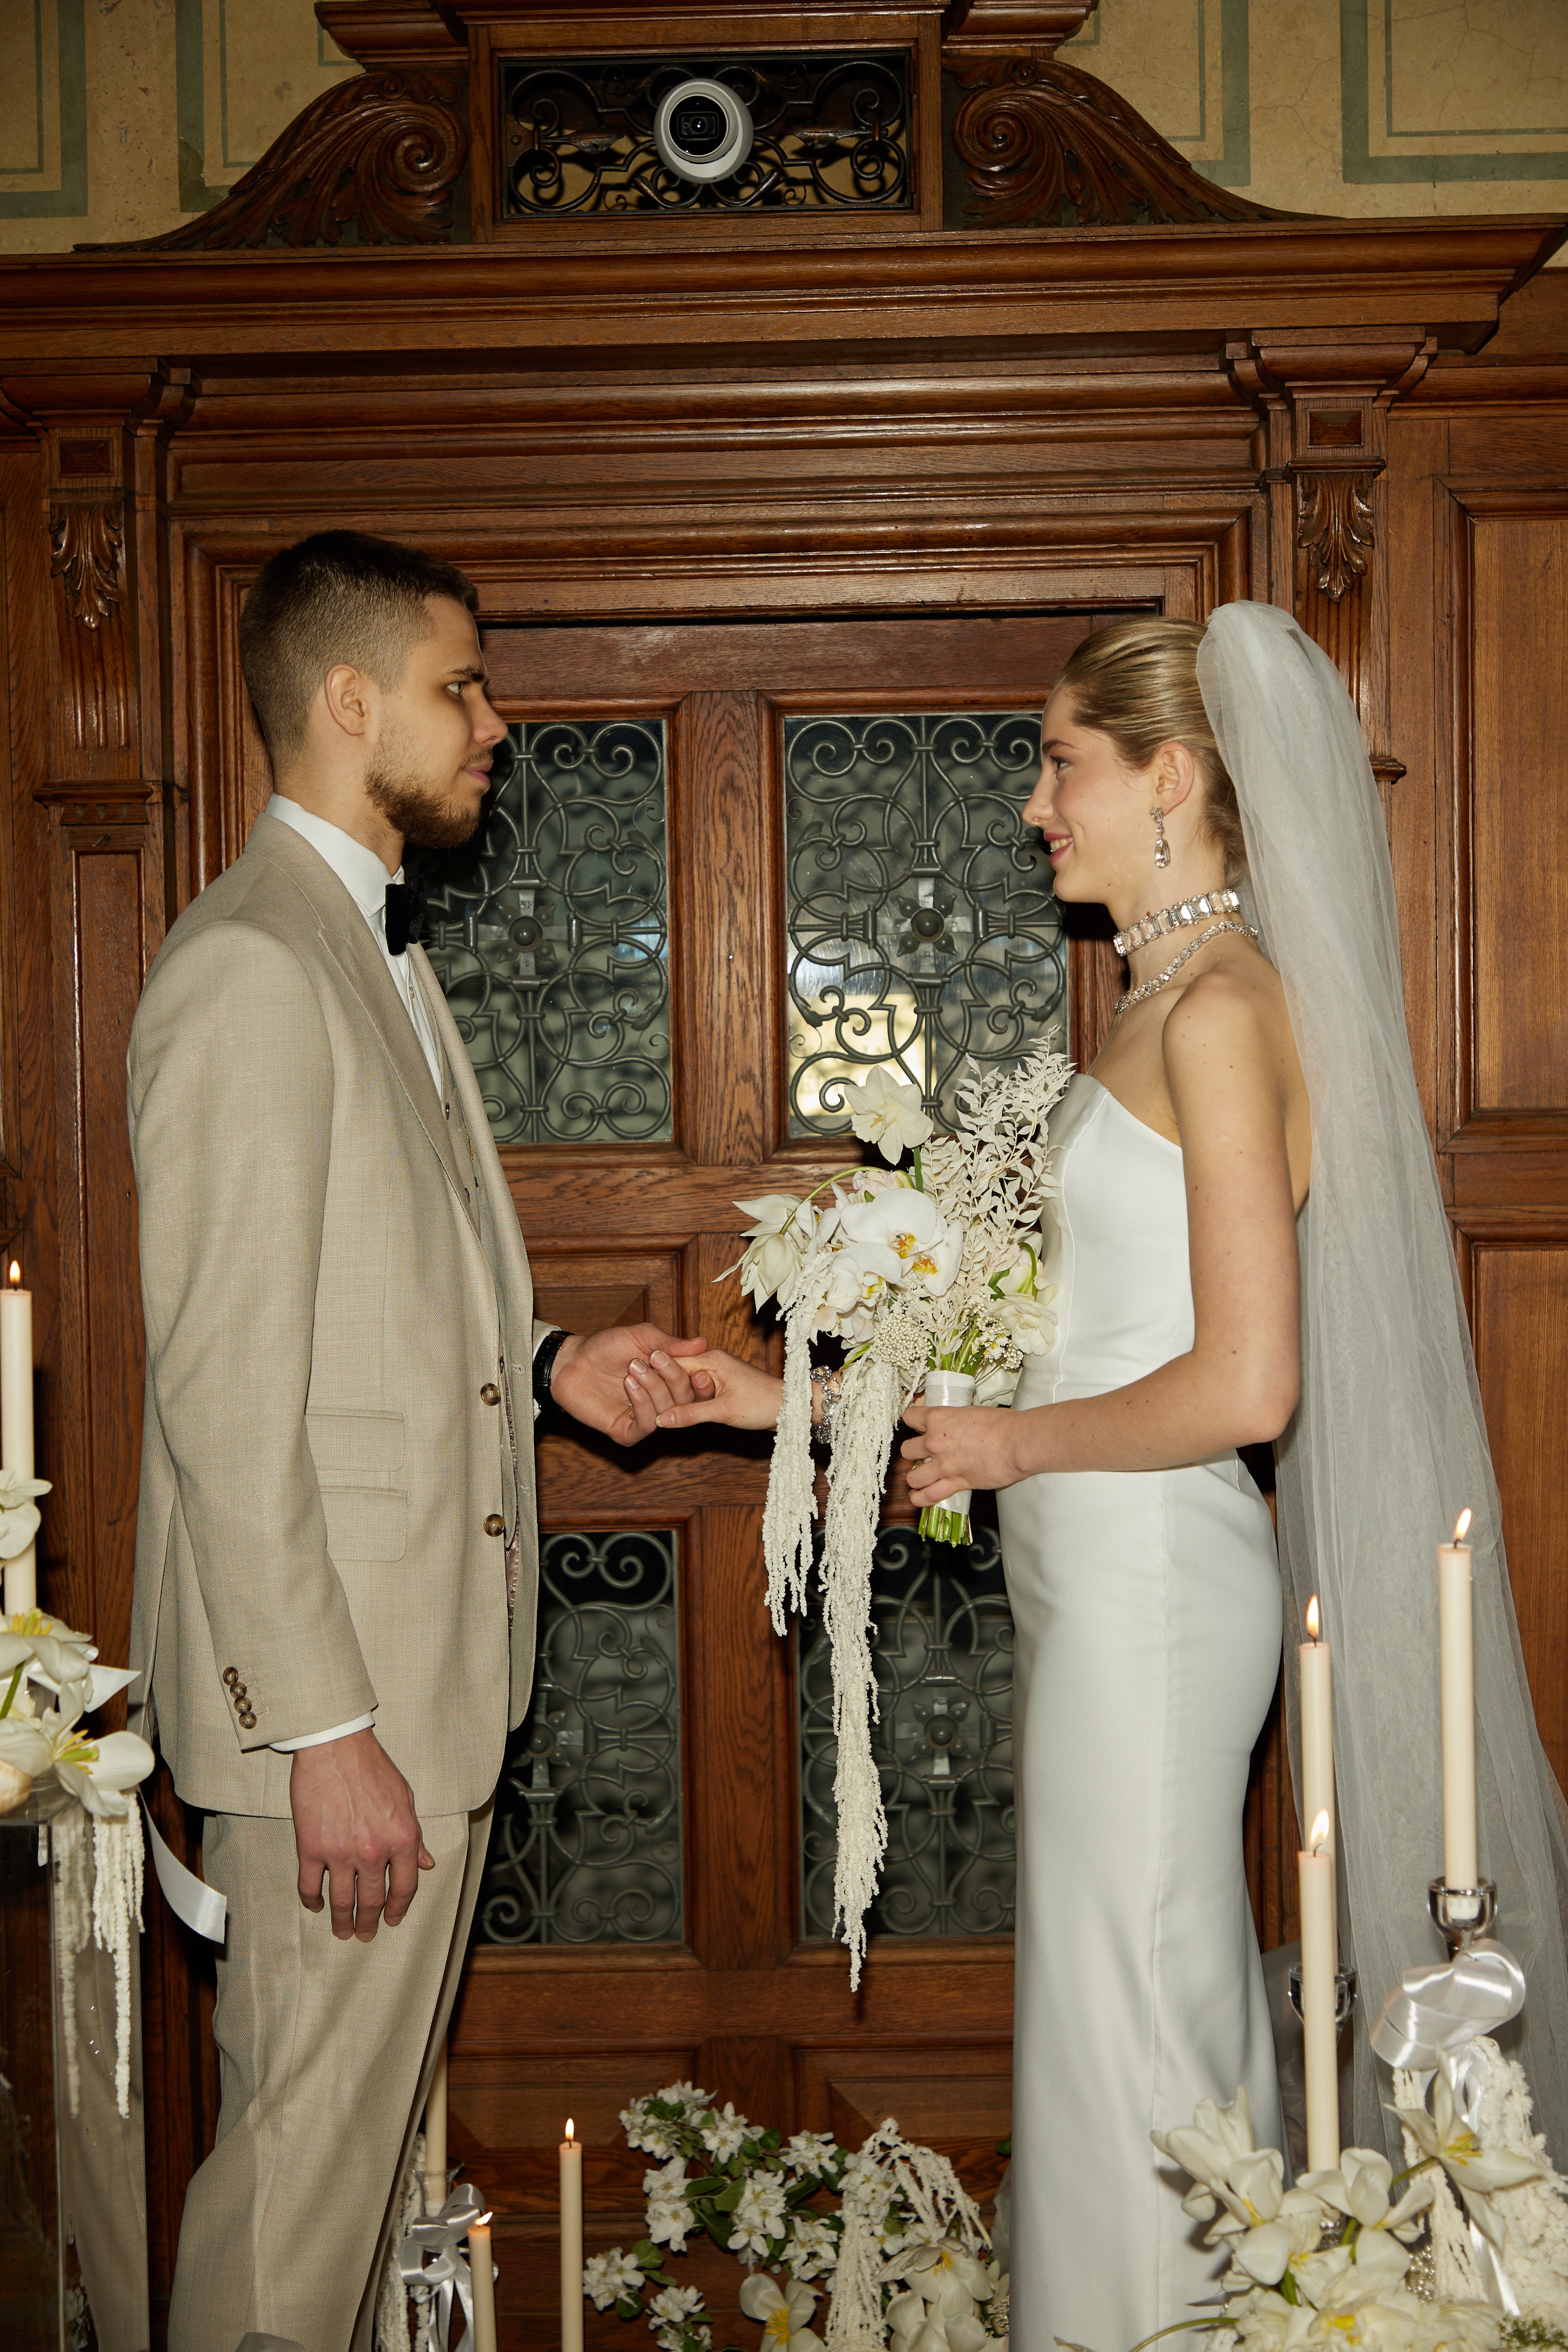 10 Reasons to Choose an Intimate Wedding Ceremony